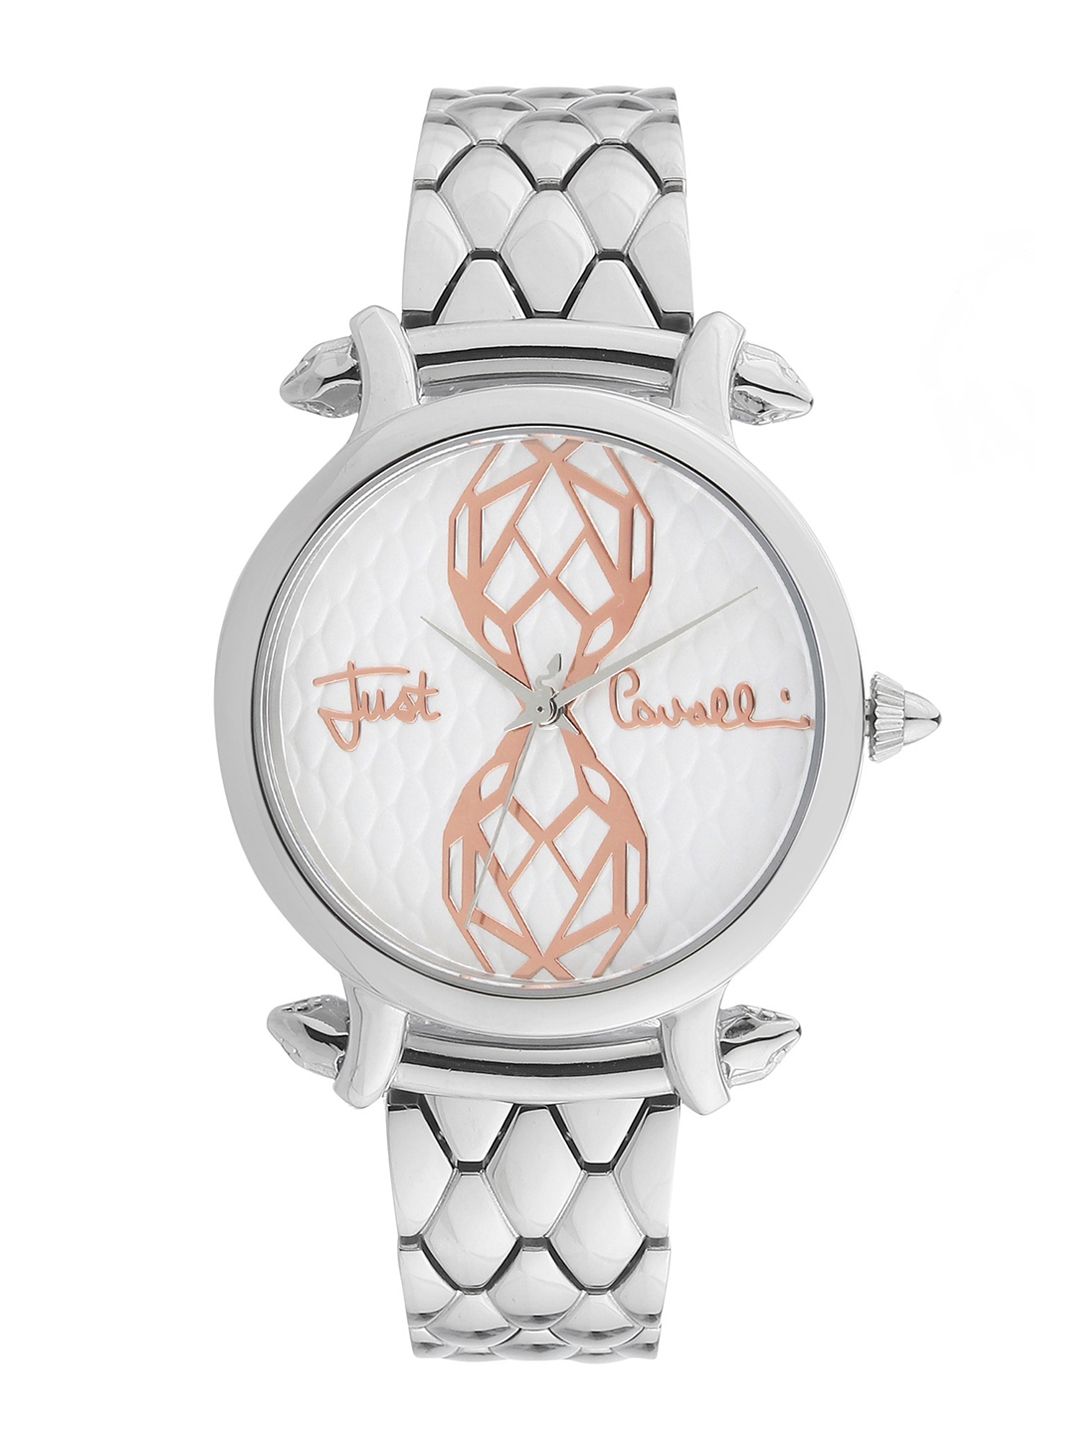 Just Cavalli Women Silver-Toned Analogue Watch JC1L061M0045 Price in India